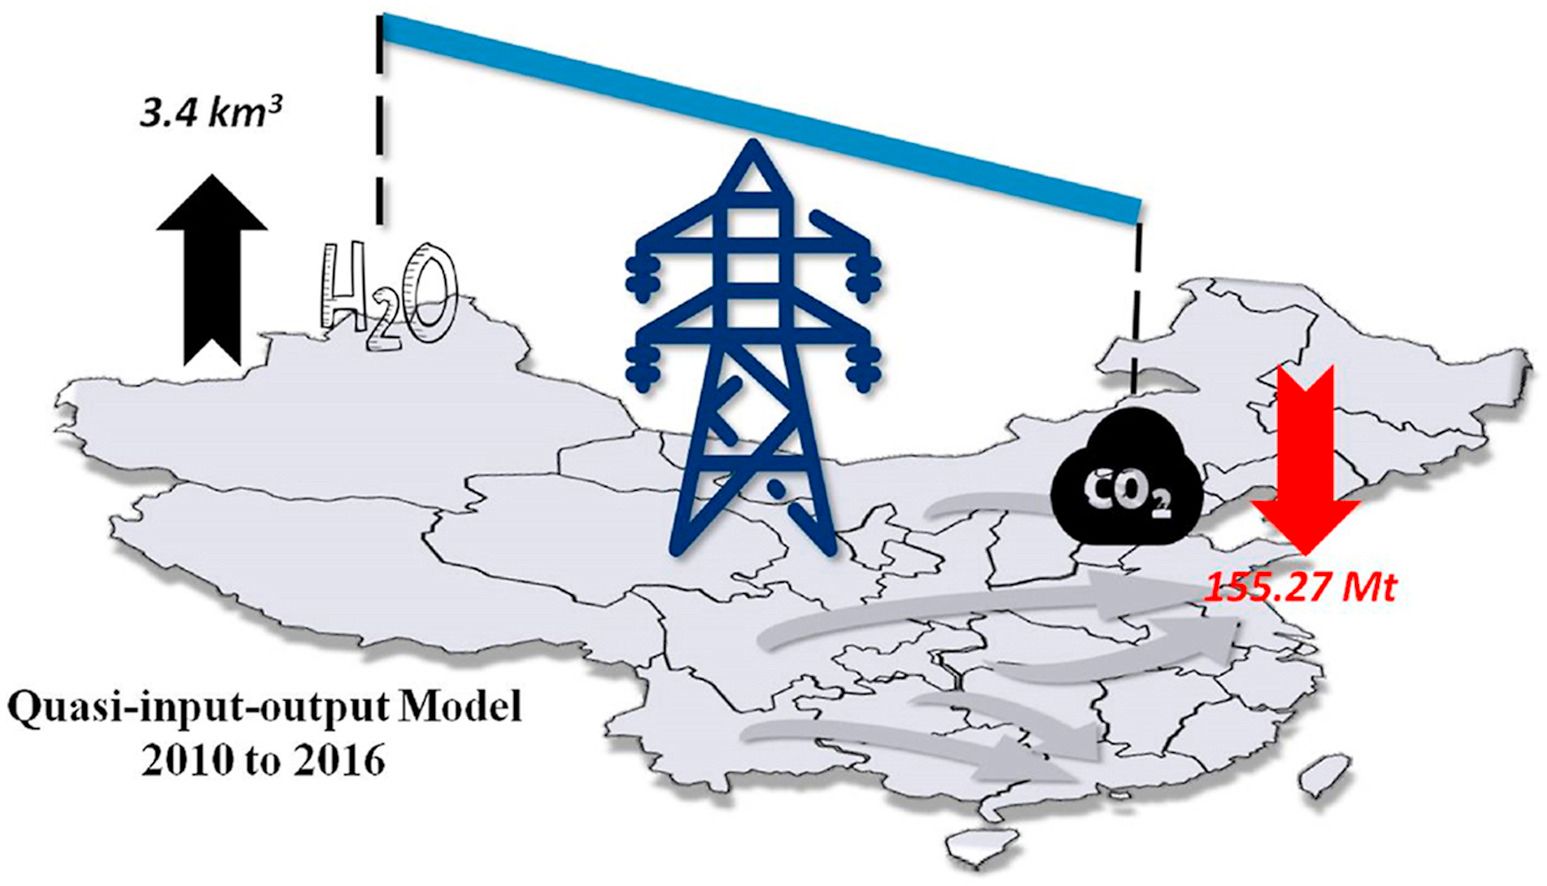 Water-carbon trade-off for inter-provincial electricity transmissions in China